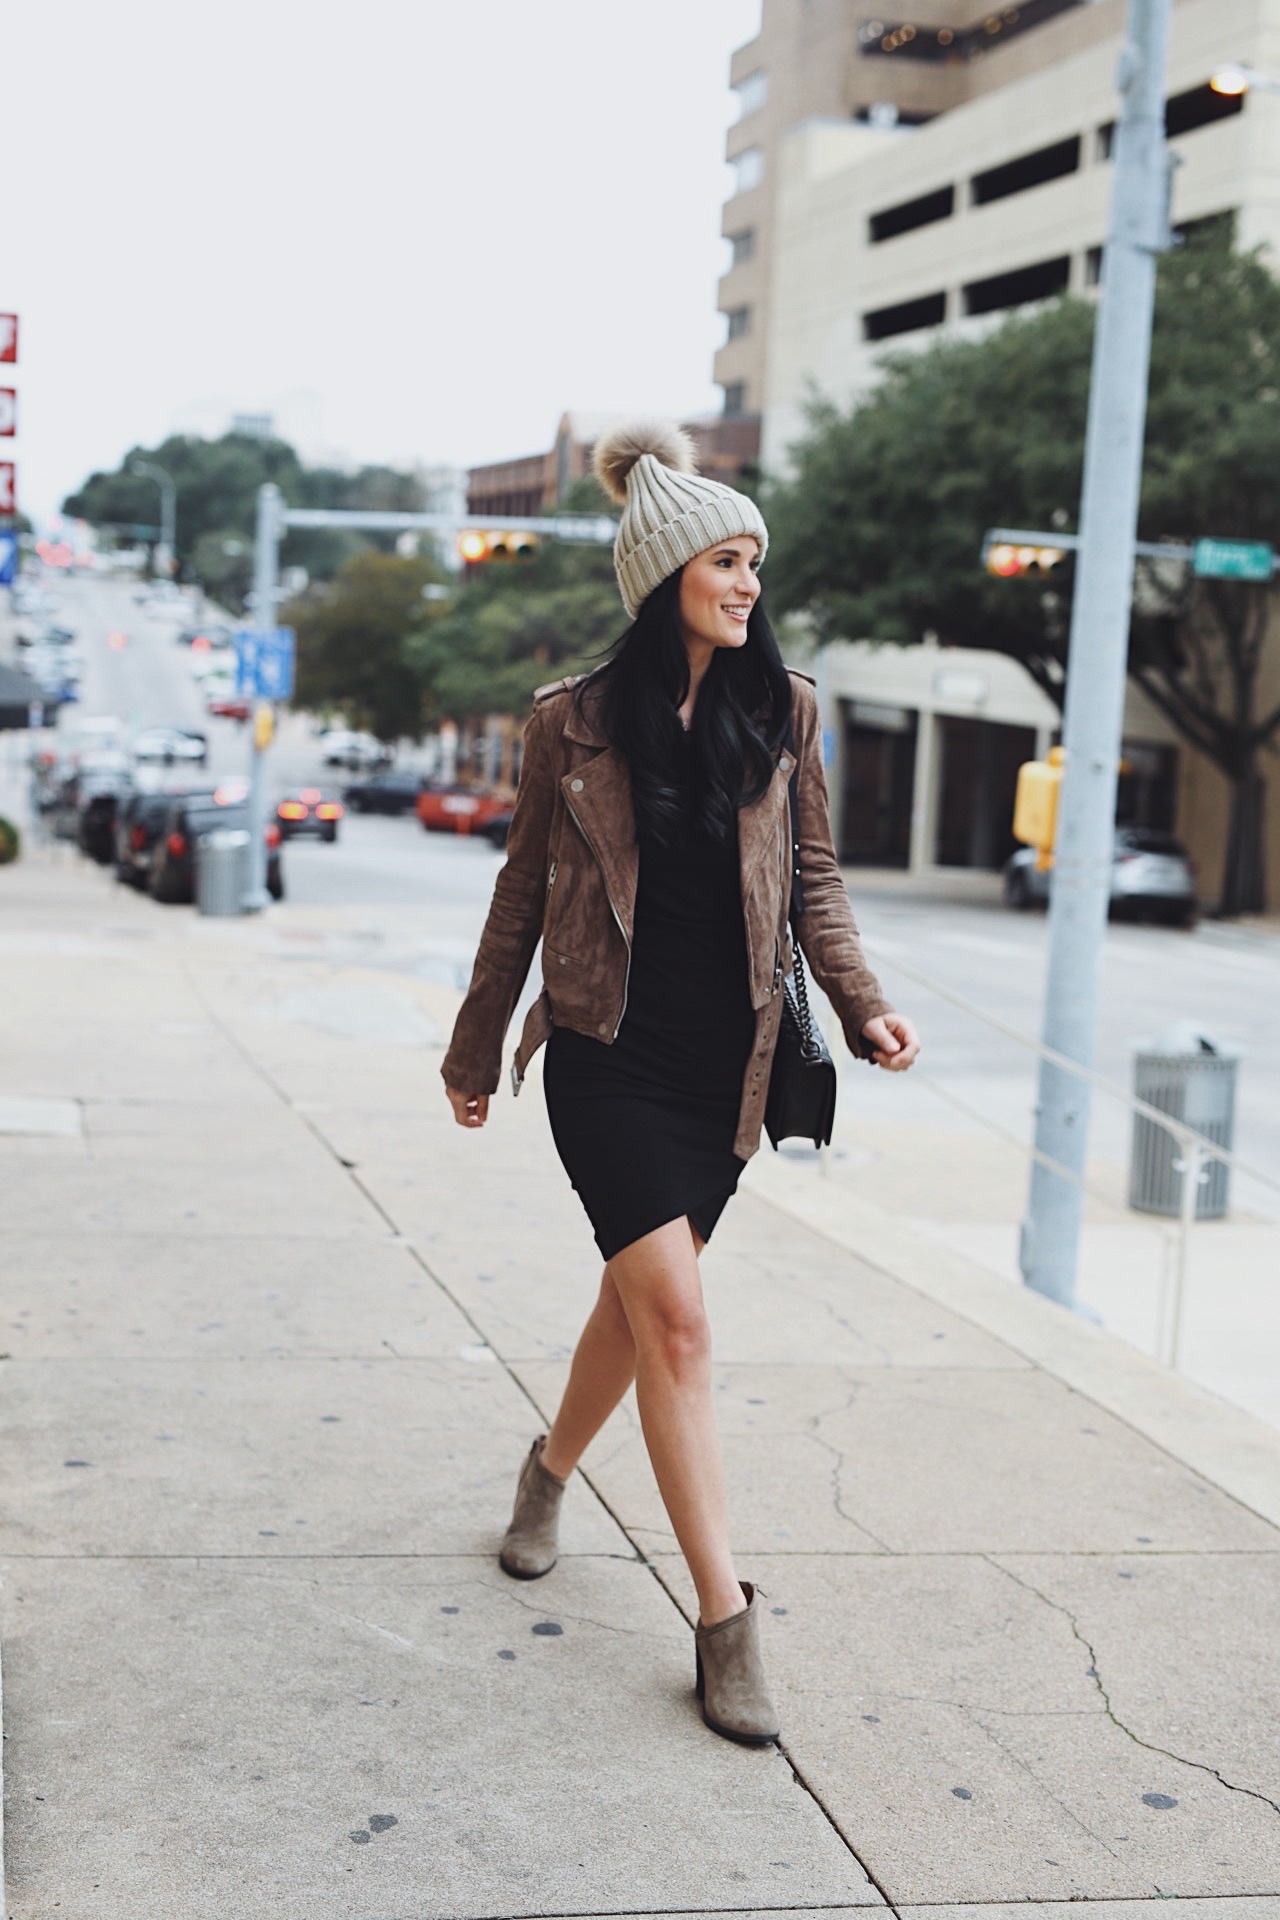 DTKAustin shares her favorite Fall/Winter nude booties that are all under $100 from Nordstrom. | affordable nude booties | nude bootie style | styling a nude bootie | fall shoes | must-have fall shoes | fall style tips | what to wear for fall | cool weather fashion | fashion for fall | style tips for fall | outfit ideas for fall || Dressed to Kill #nudebooties #bootieseason #fallshoes #fallstyle